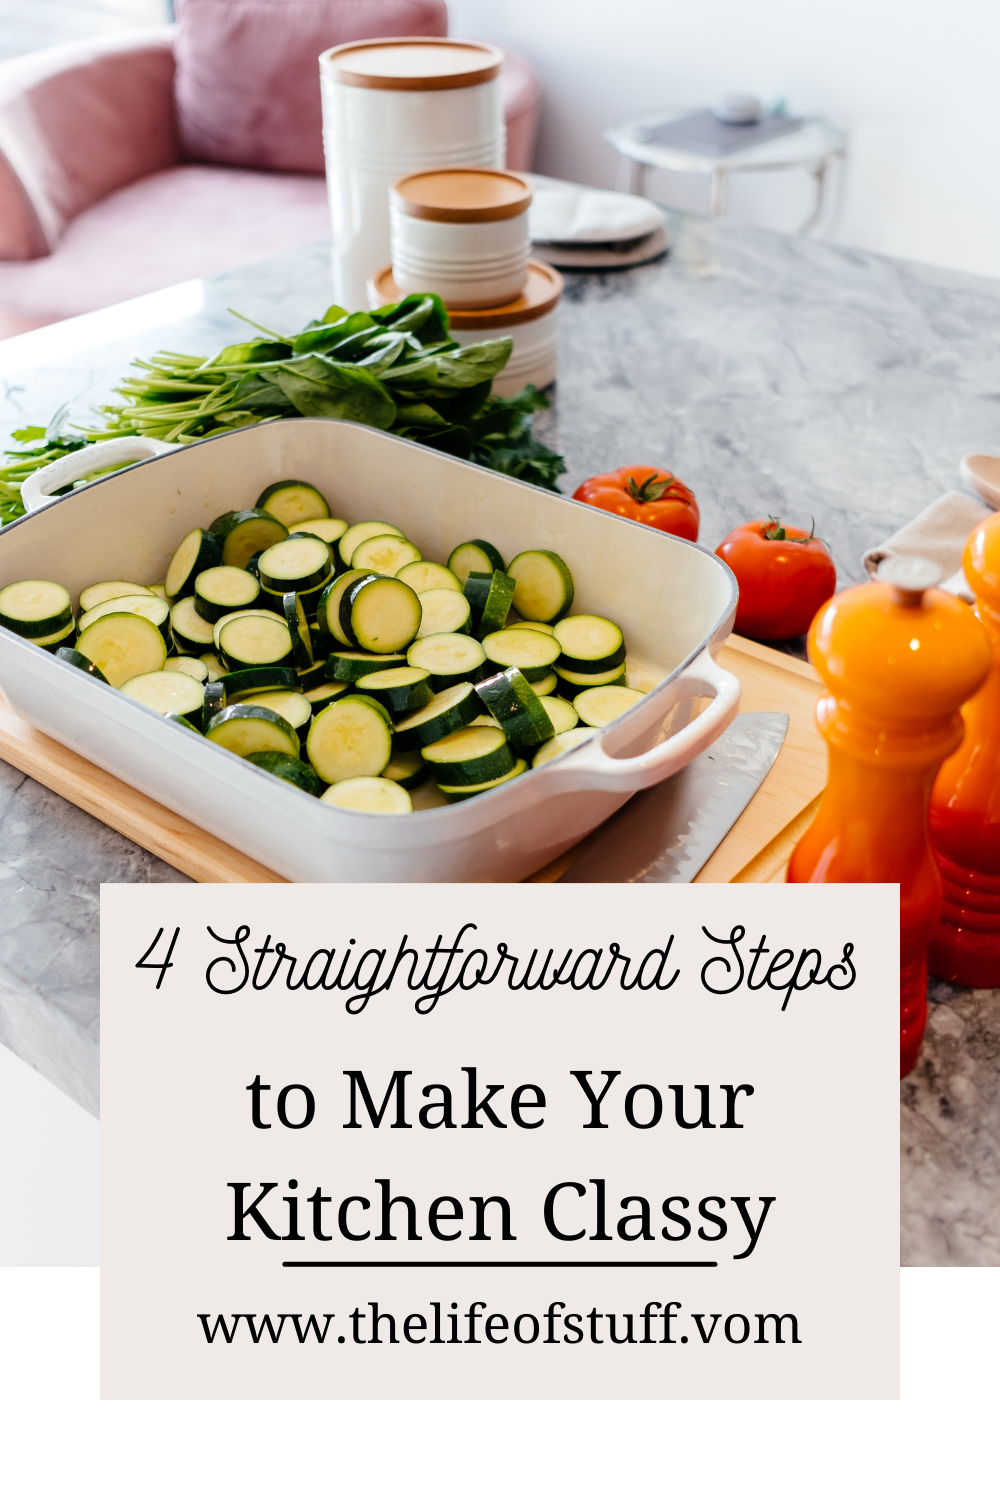 Help Make Your Kitchen Classy in 4 Straightforward Steps - The Life of Stuff